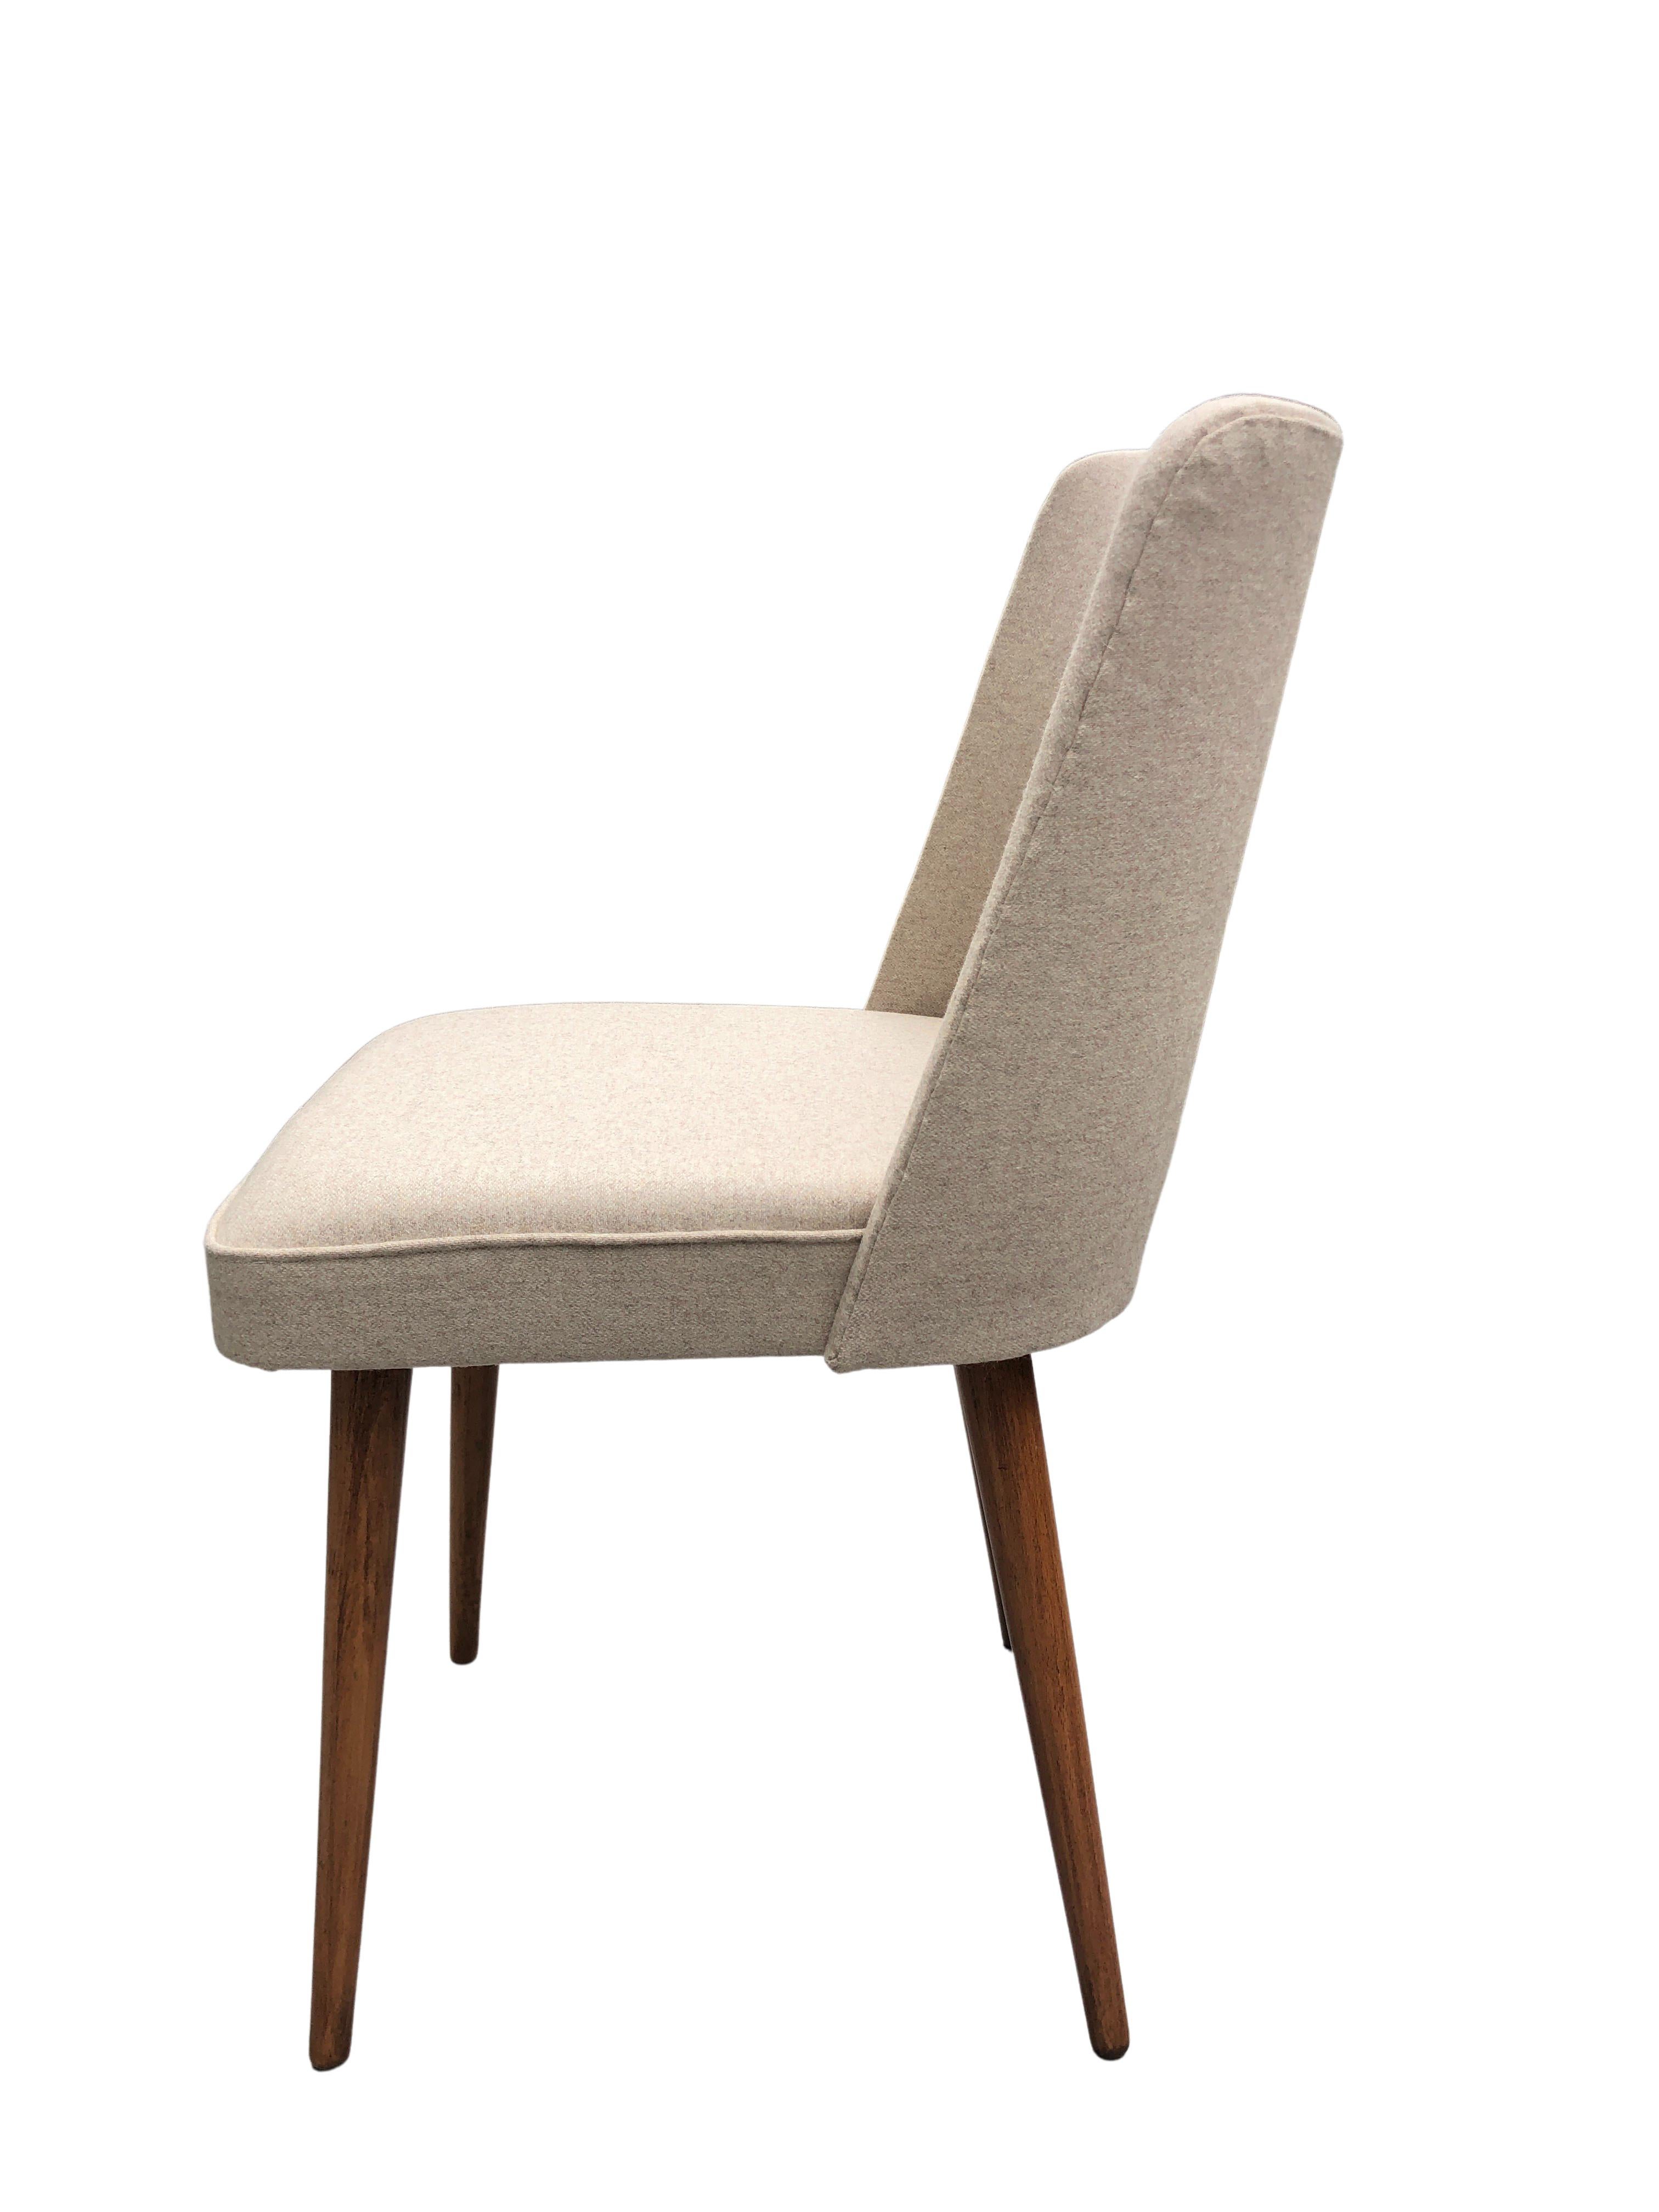 Polish Beige Wool Shell Dining Chair by Lesniewski, 1960s For Sale